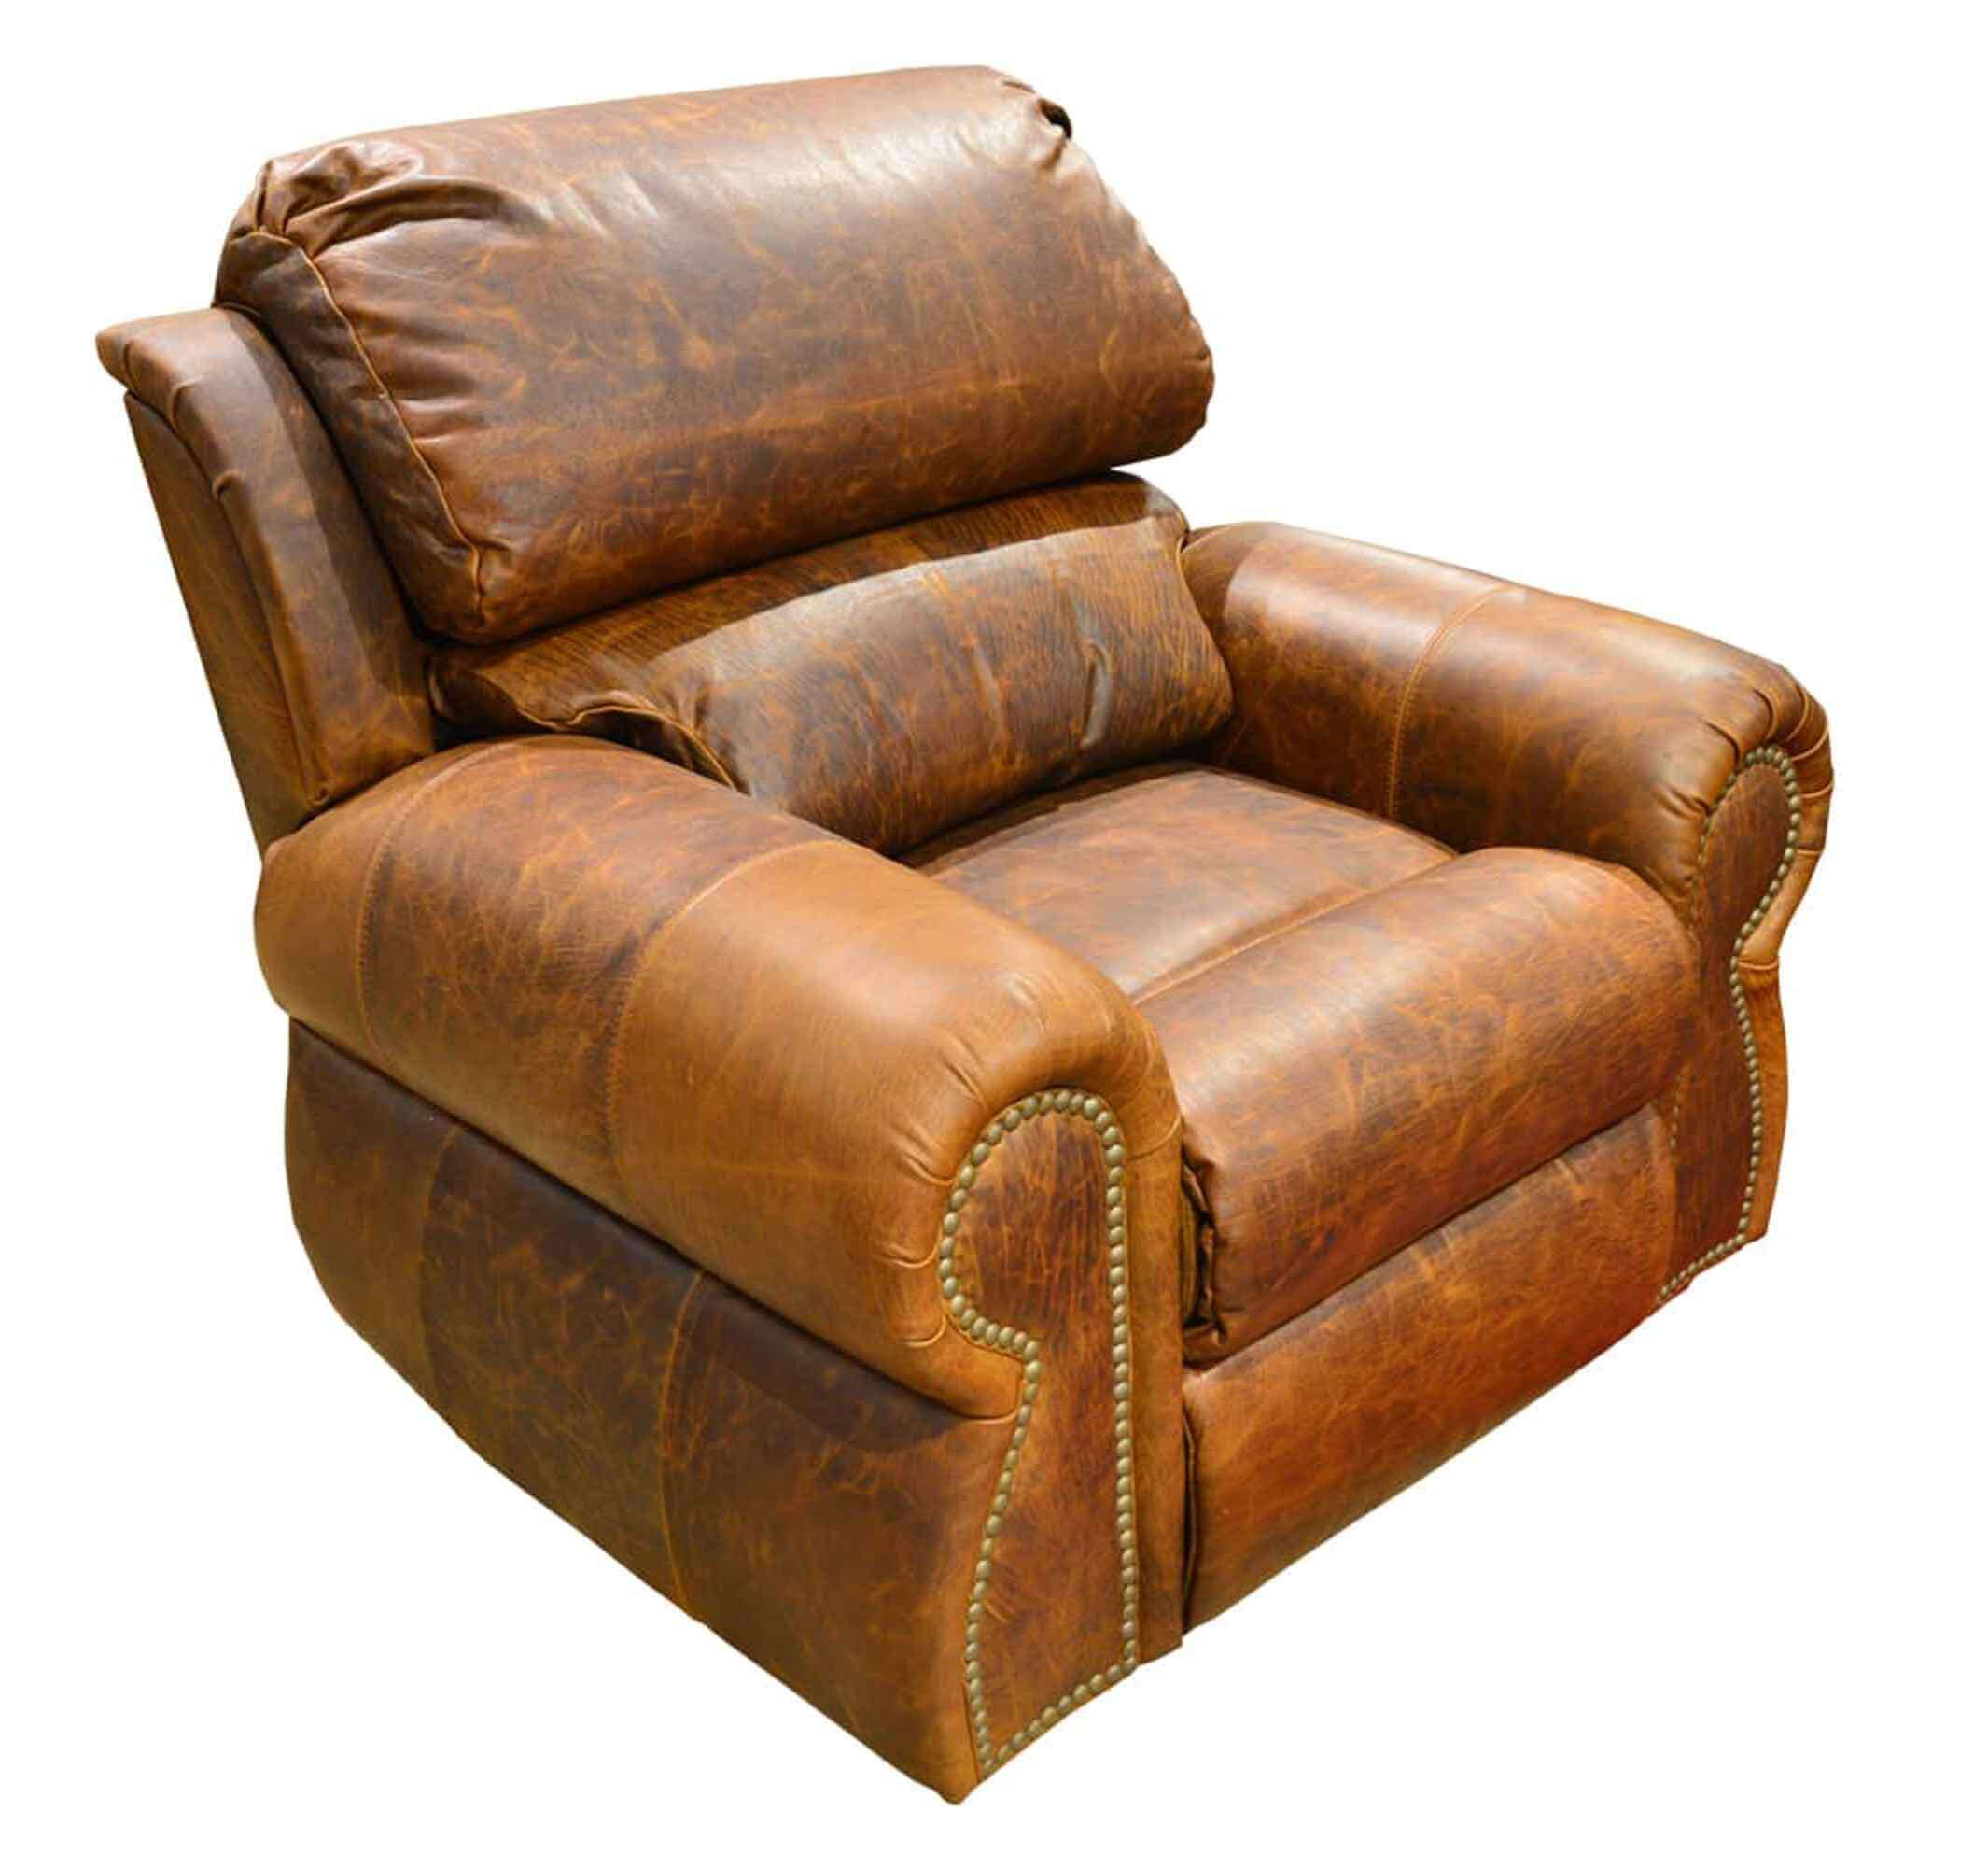 The Ultimate Recliner | Western Leather Cowhide Recliner